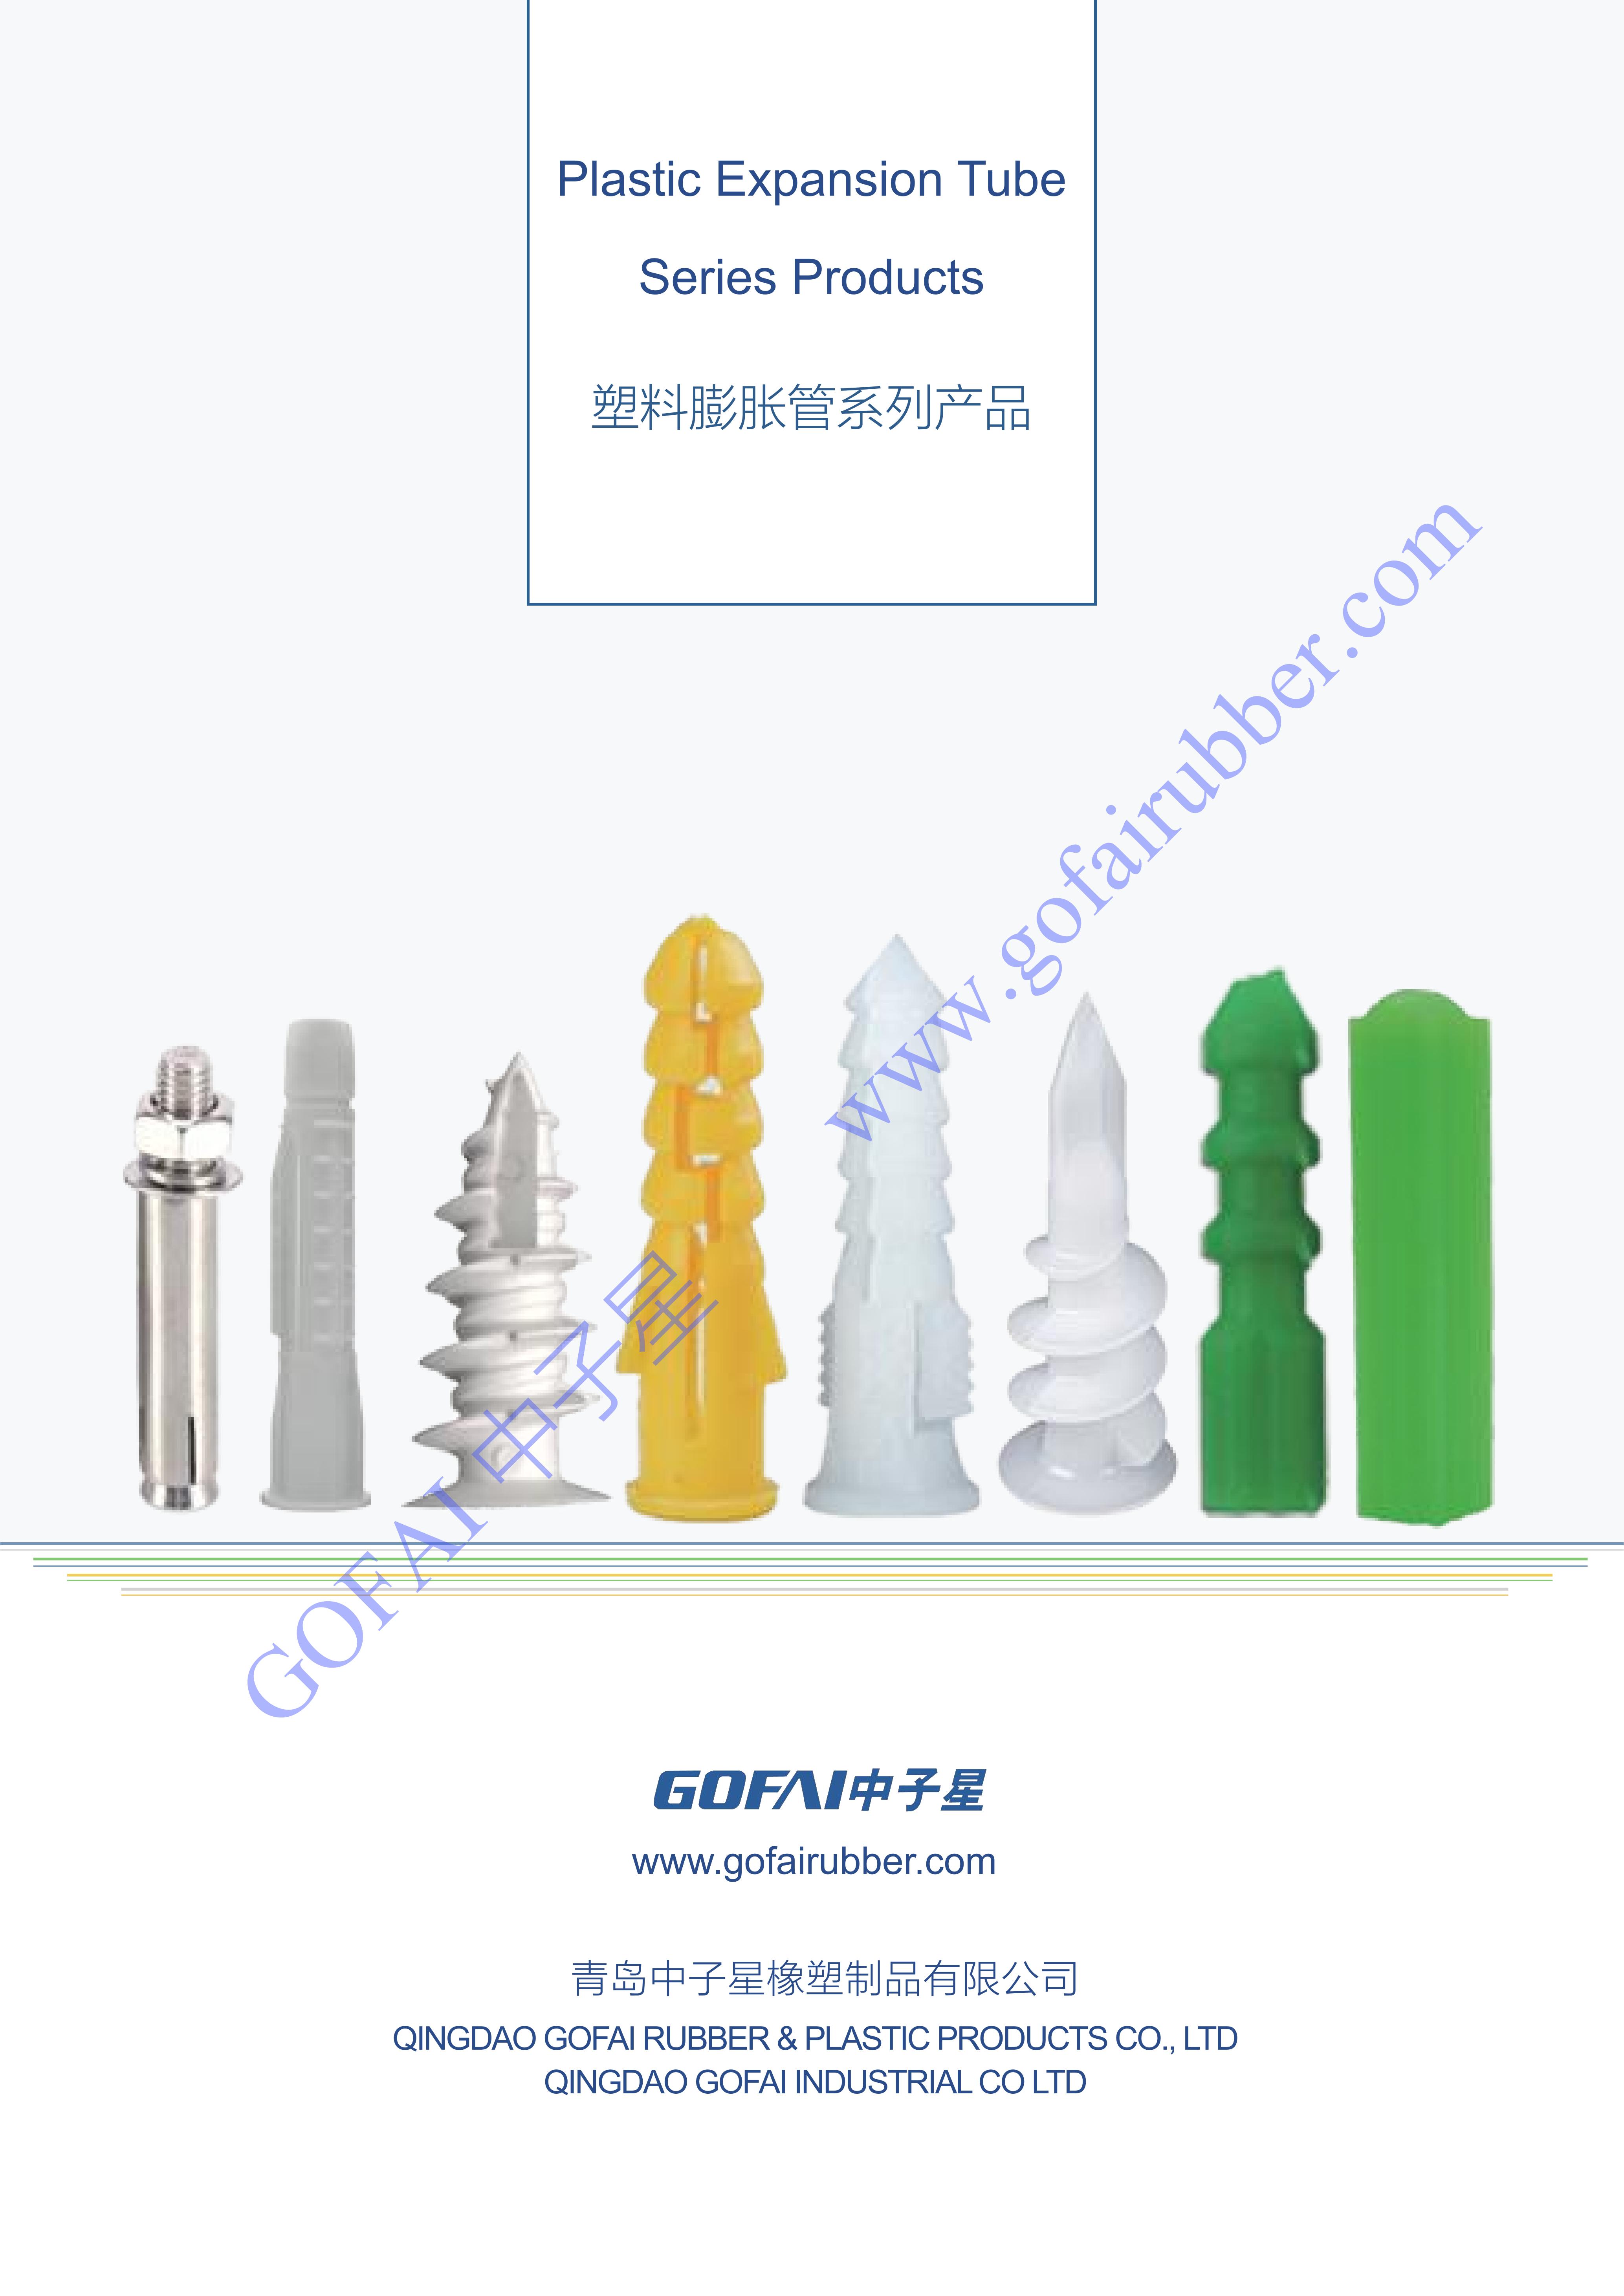 GOFAI Plastic Expansion Tube Series Products Brochure